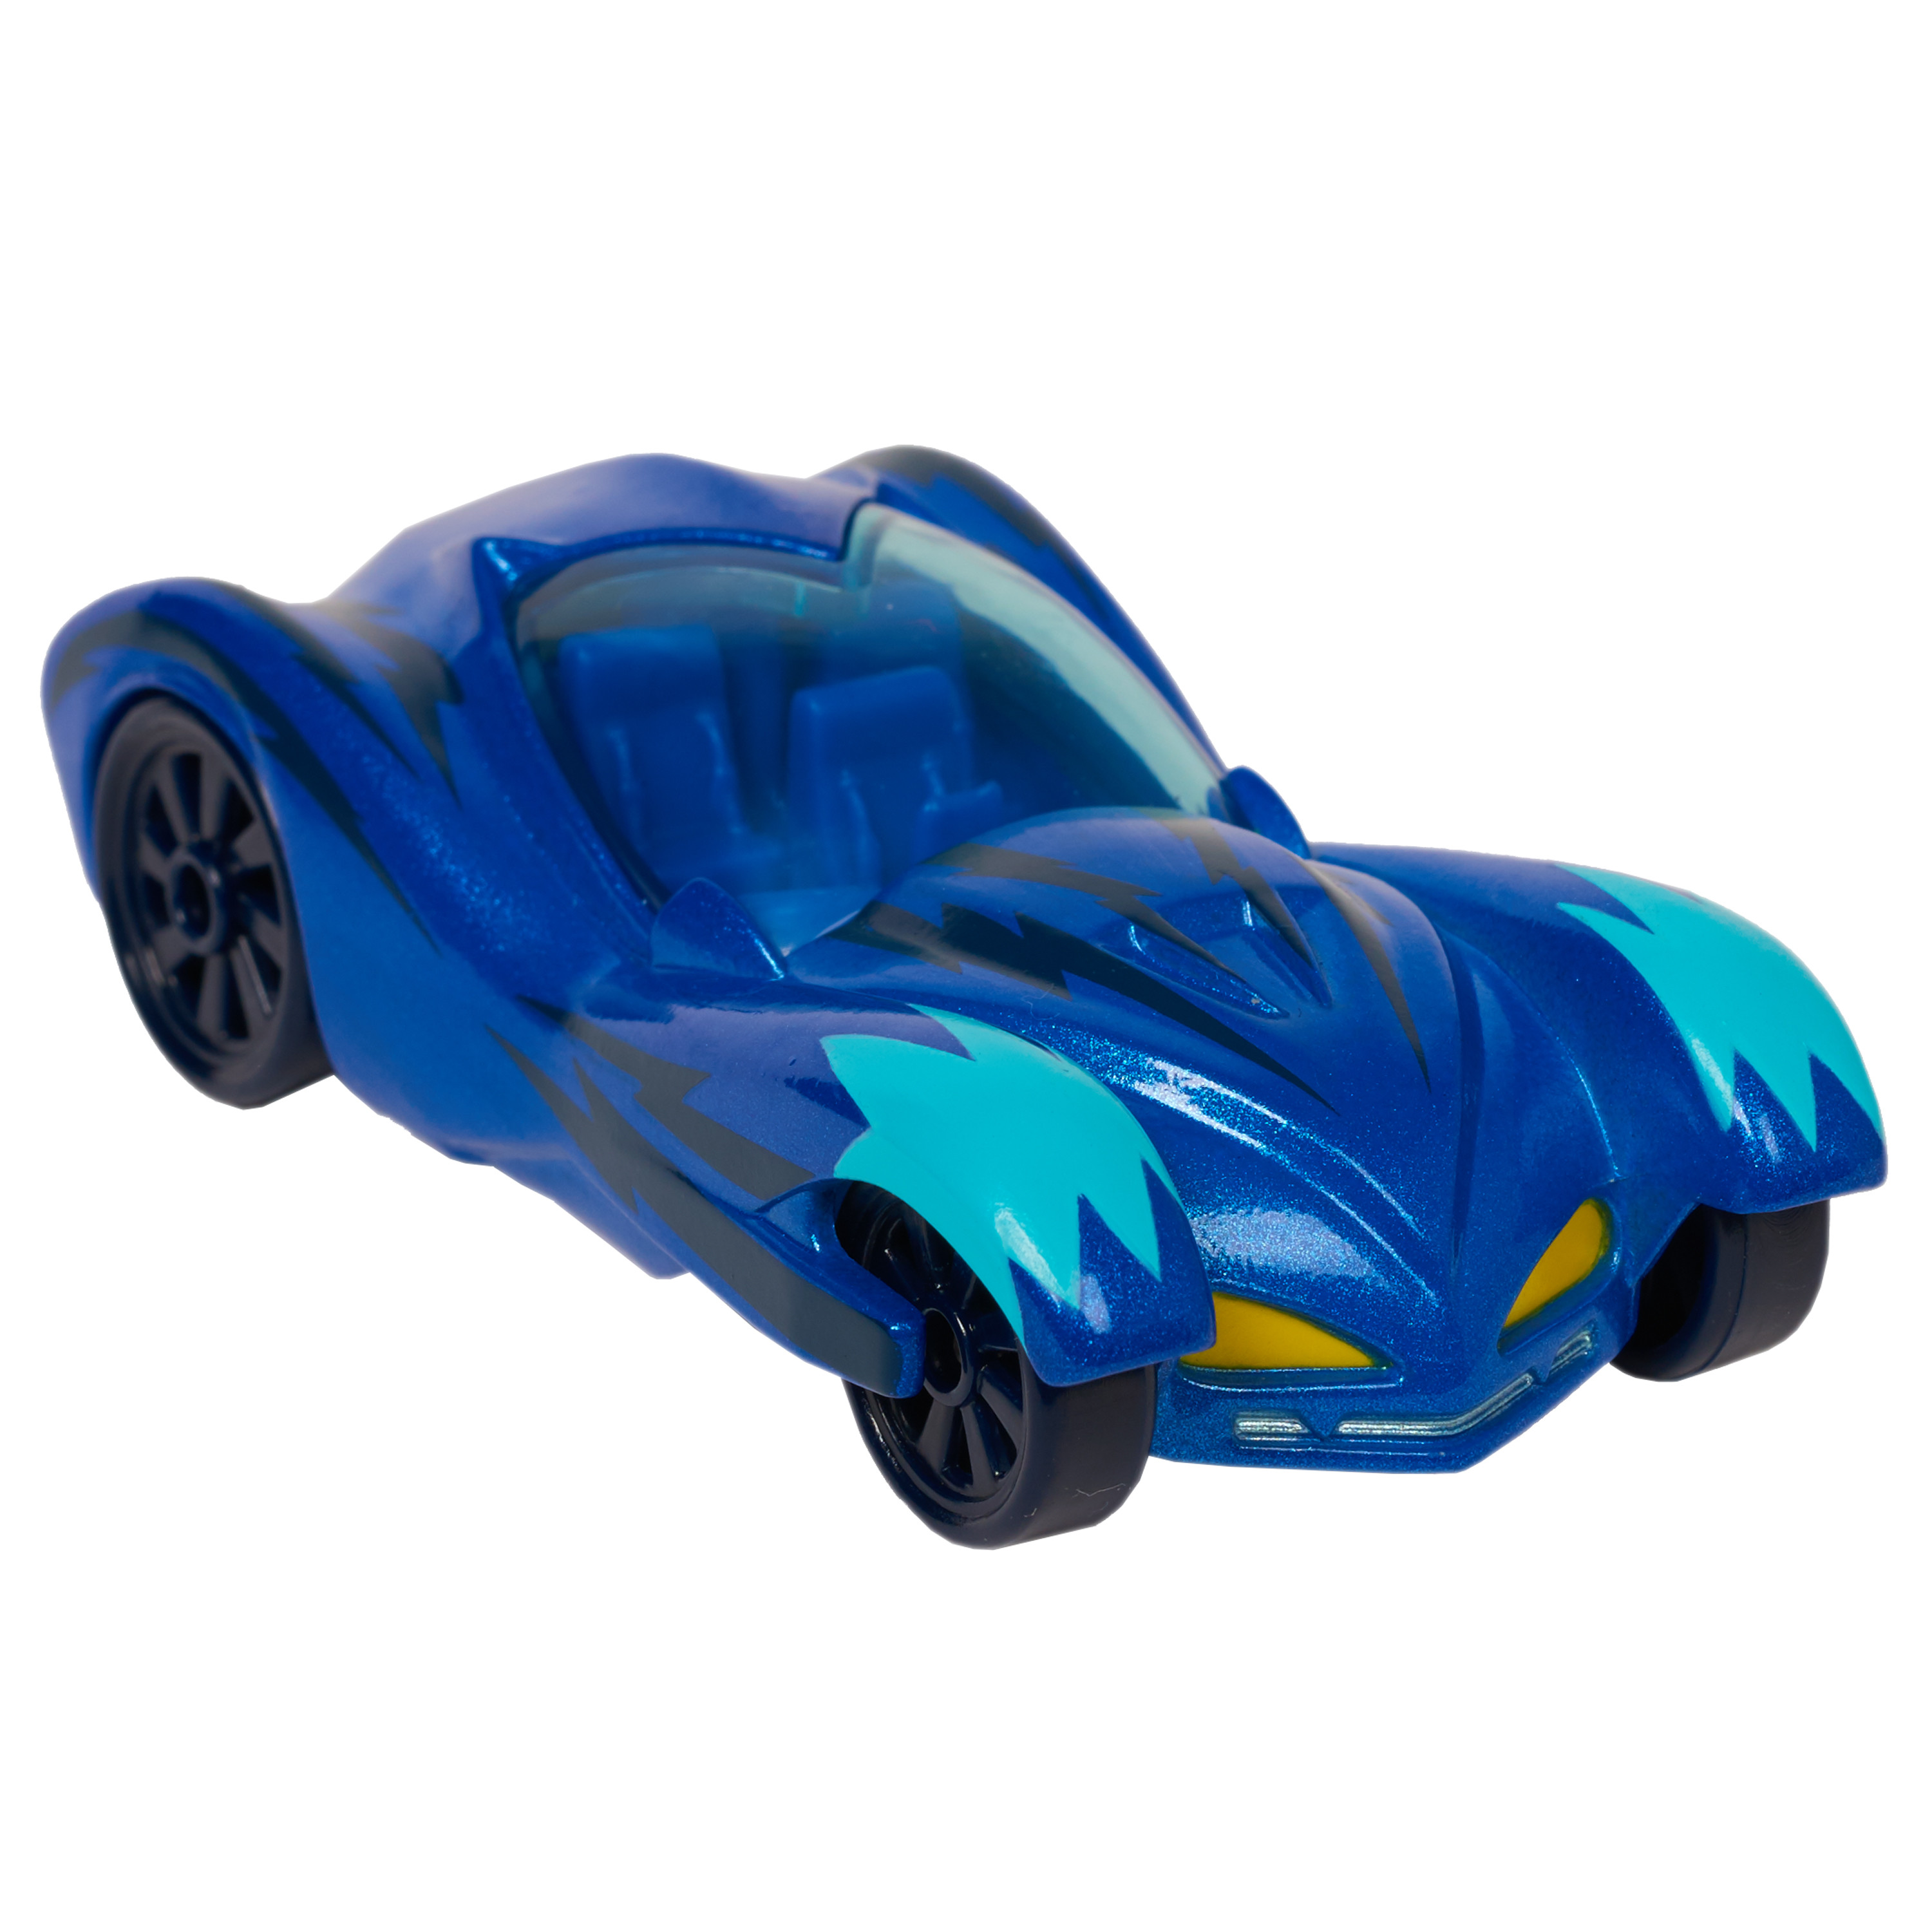 PJ Masks Die Cast Vehicle, Cat-Car,  Kids Toys for Ages 3 Up, Gifts and Presents - image 1 of 2